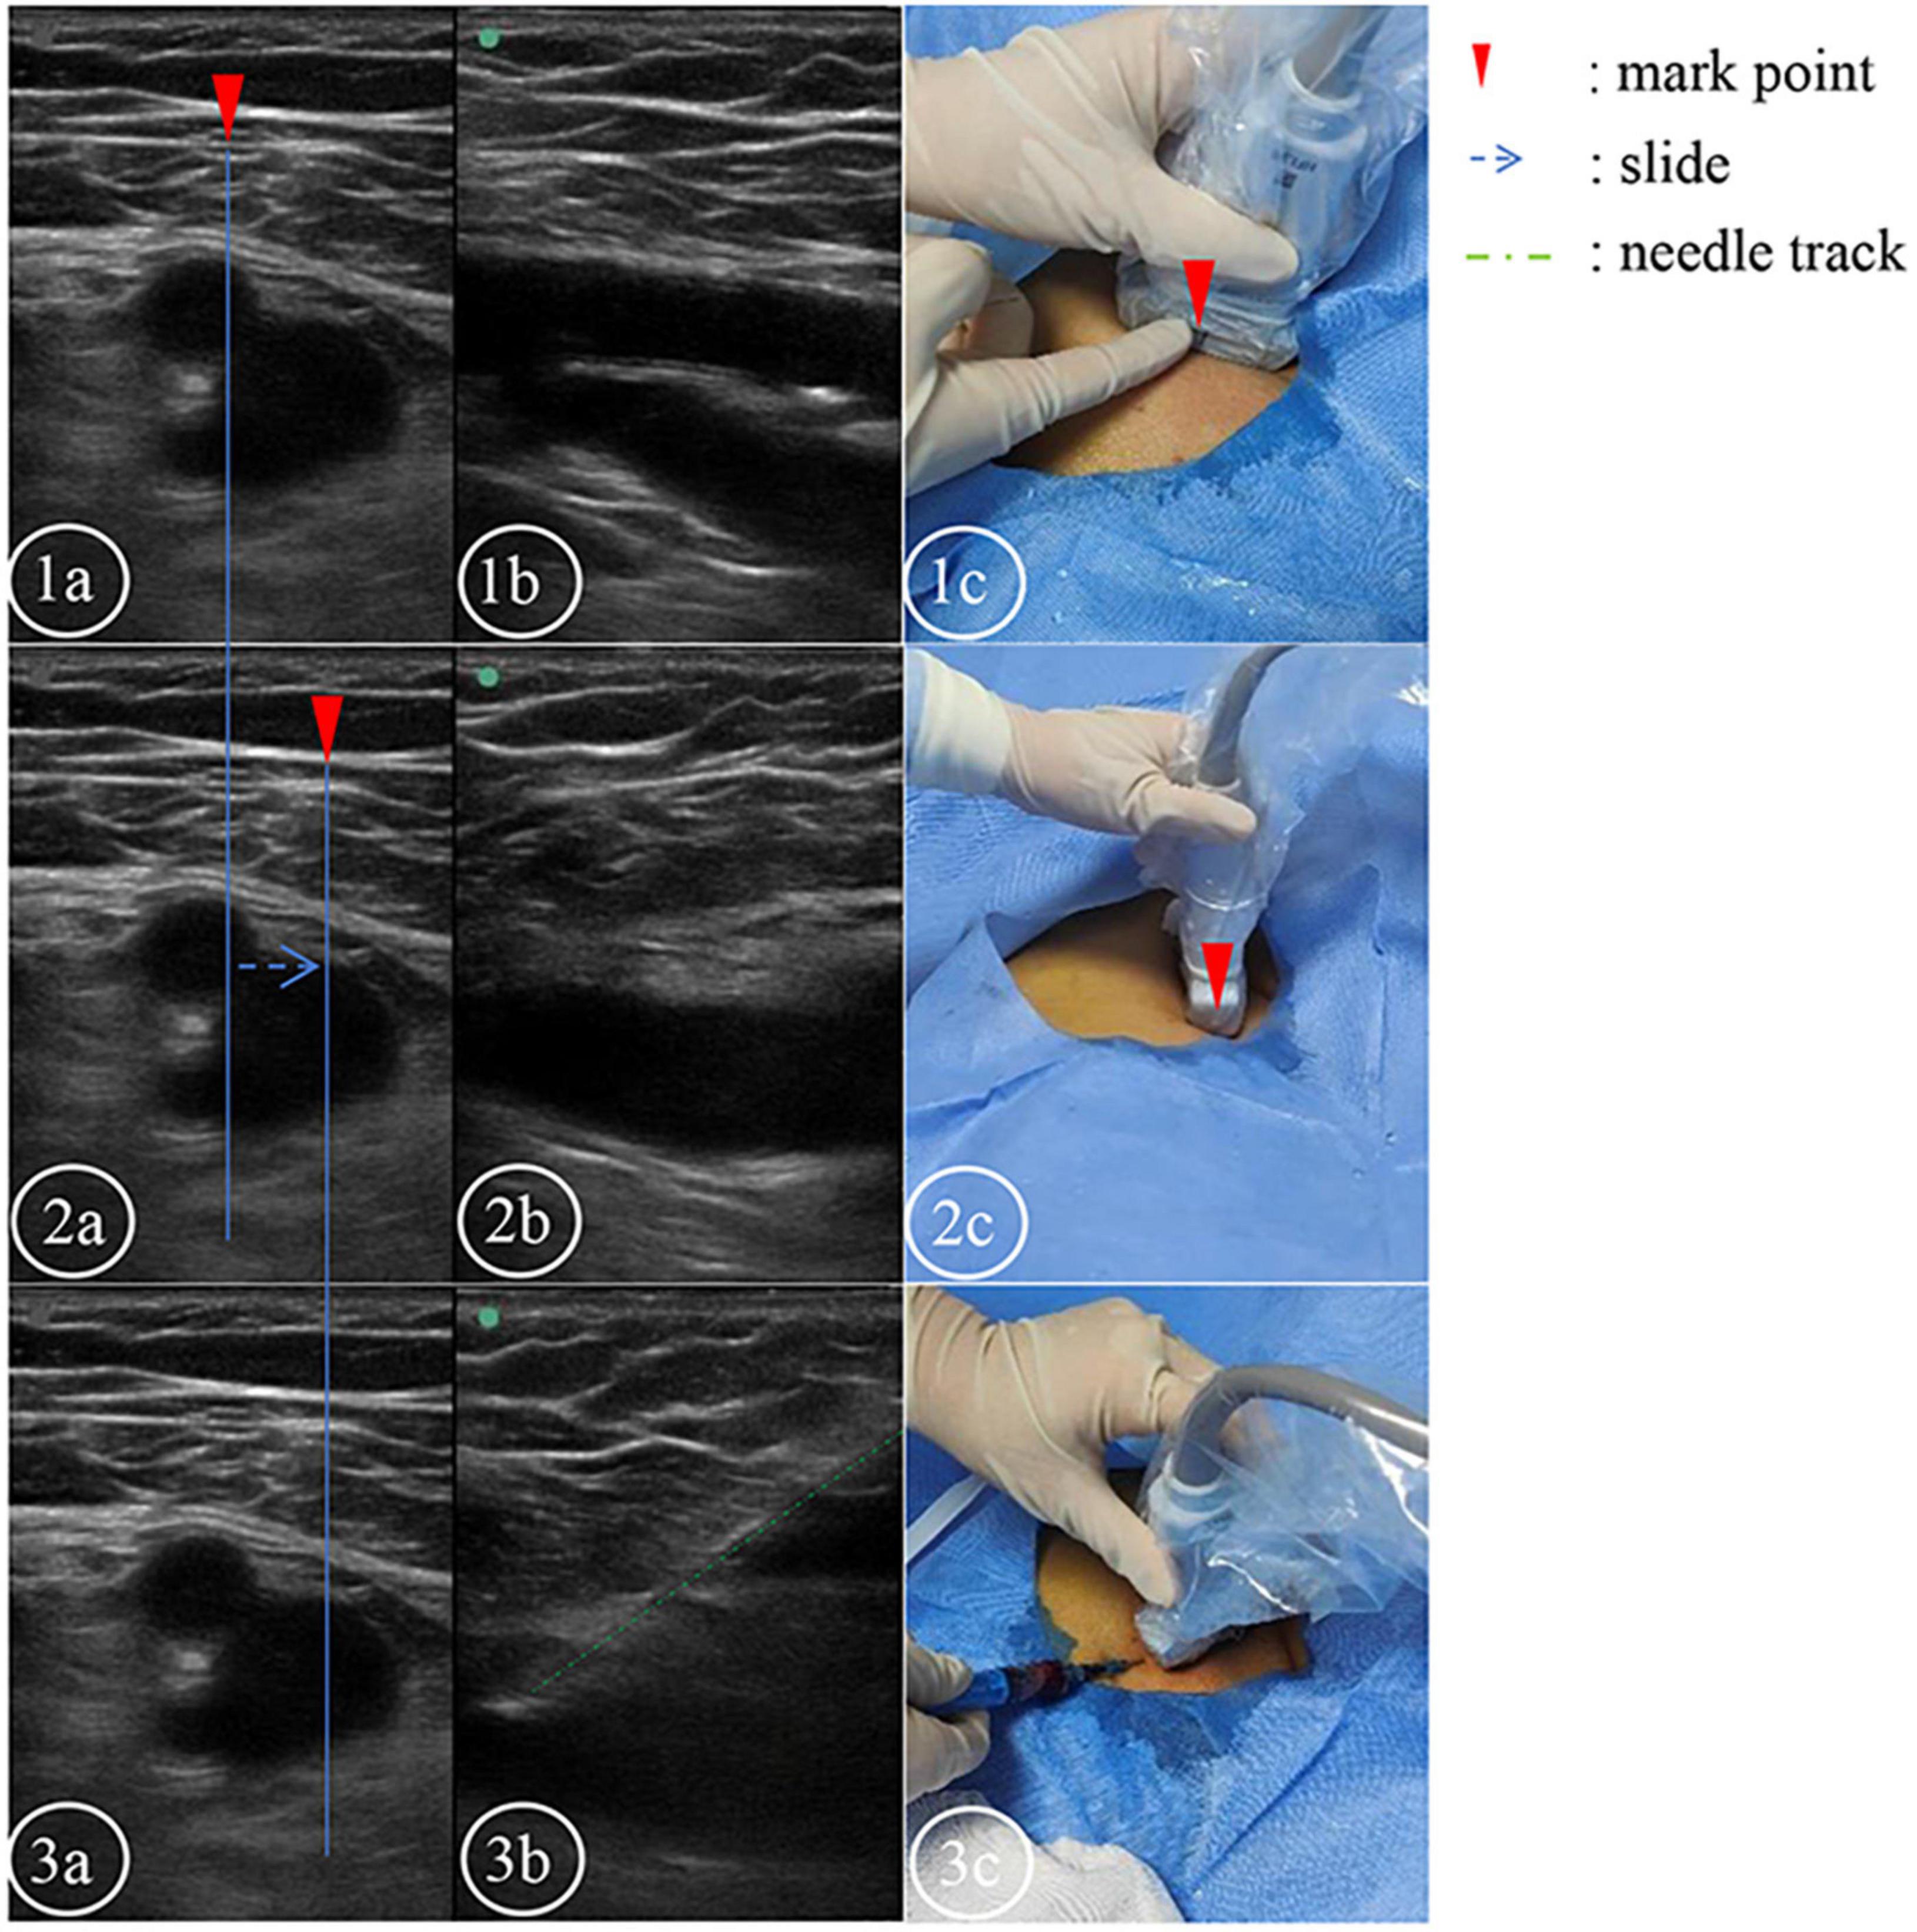 Application of the ultrasound-guided double-screen contrast method in the standardized teaching and training of resident doctors in femoral vein puncture